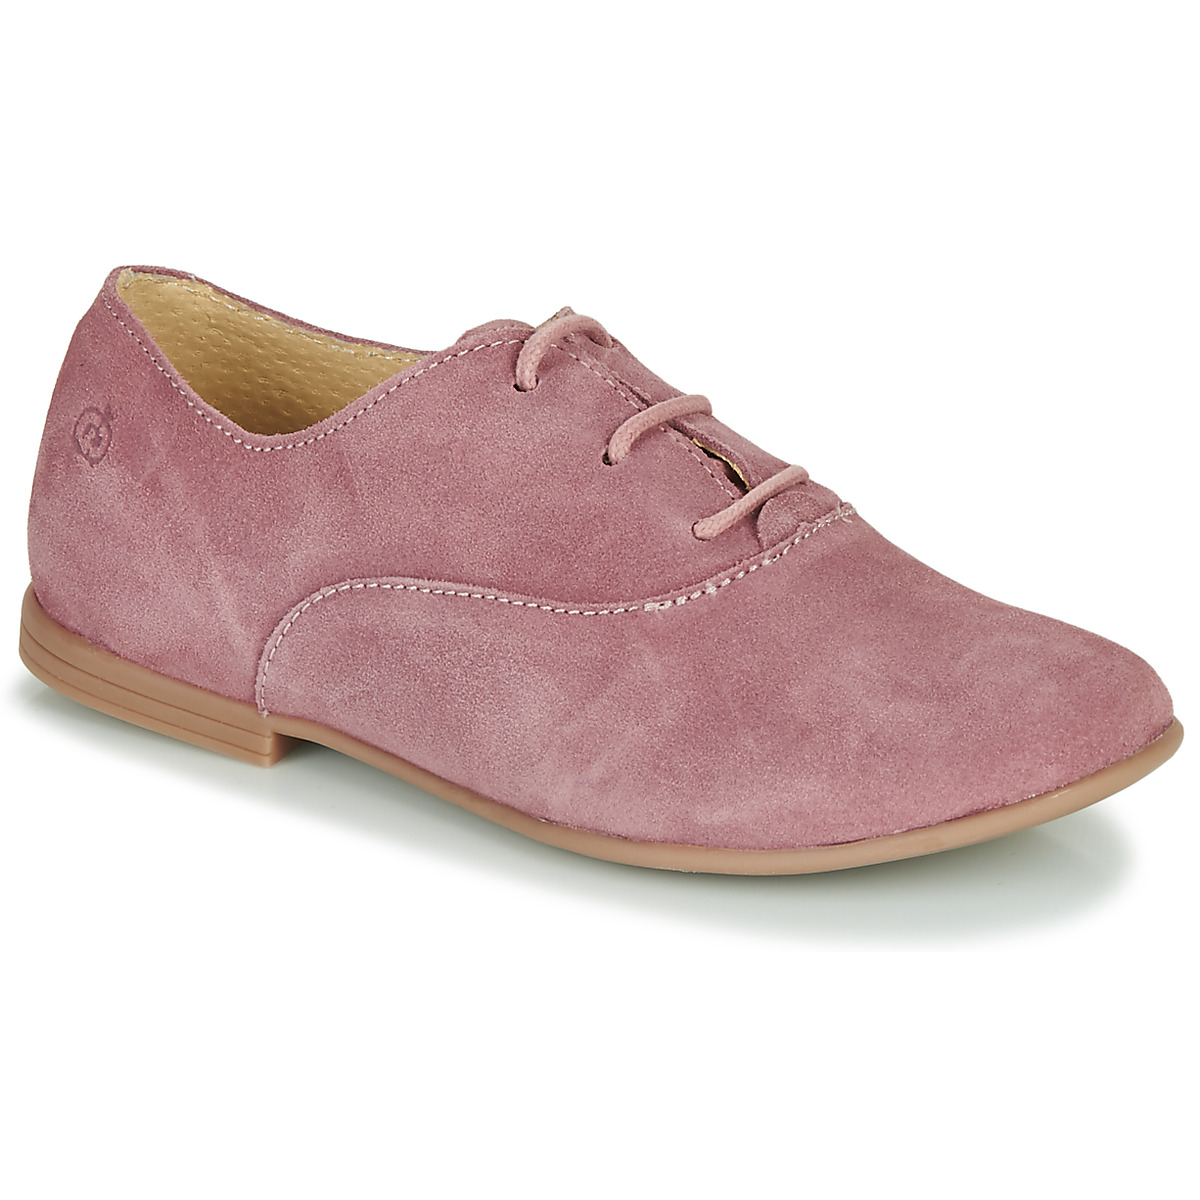 Chaussures Fille The Big Bang The MISTI Rose